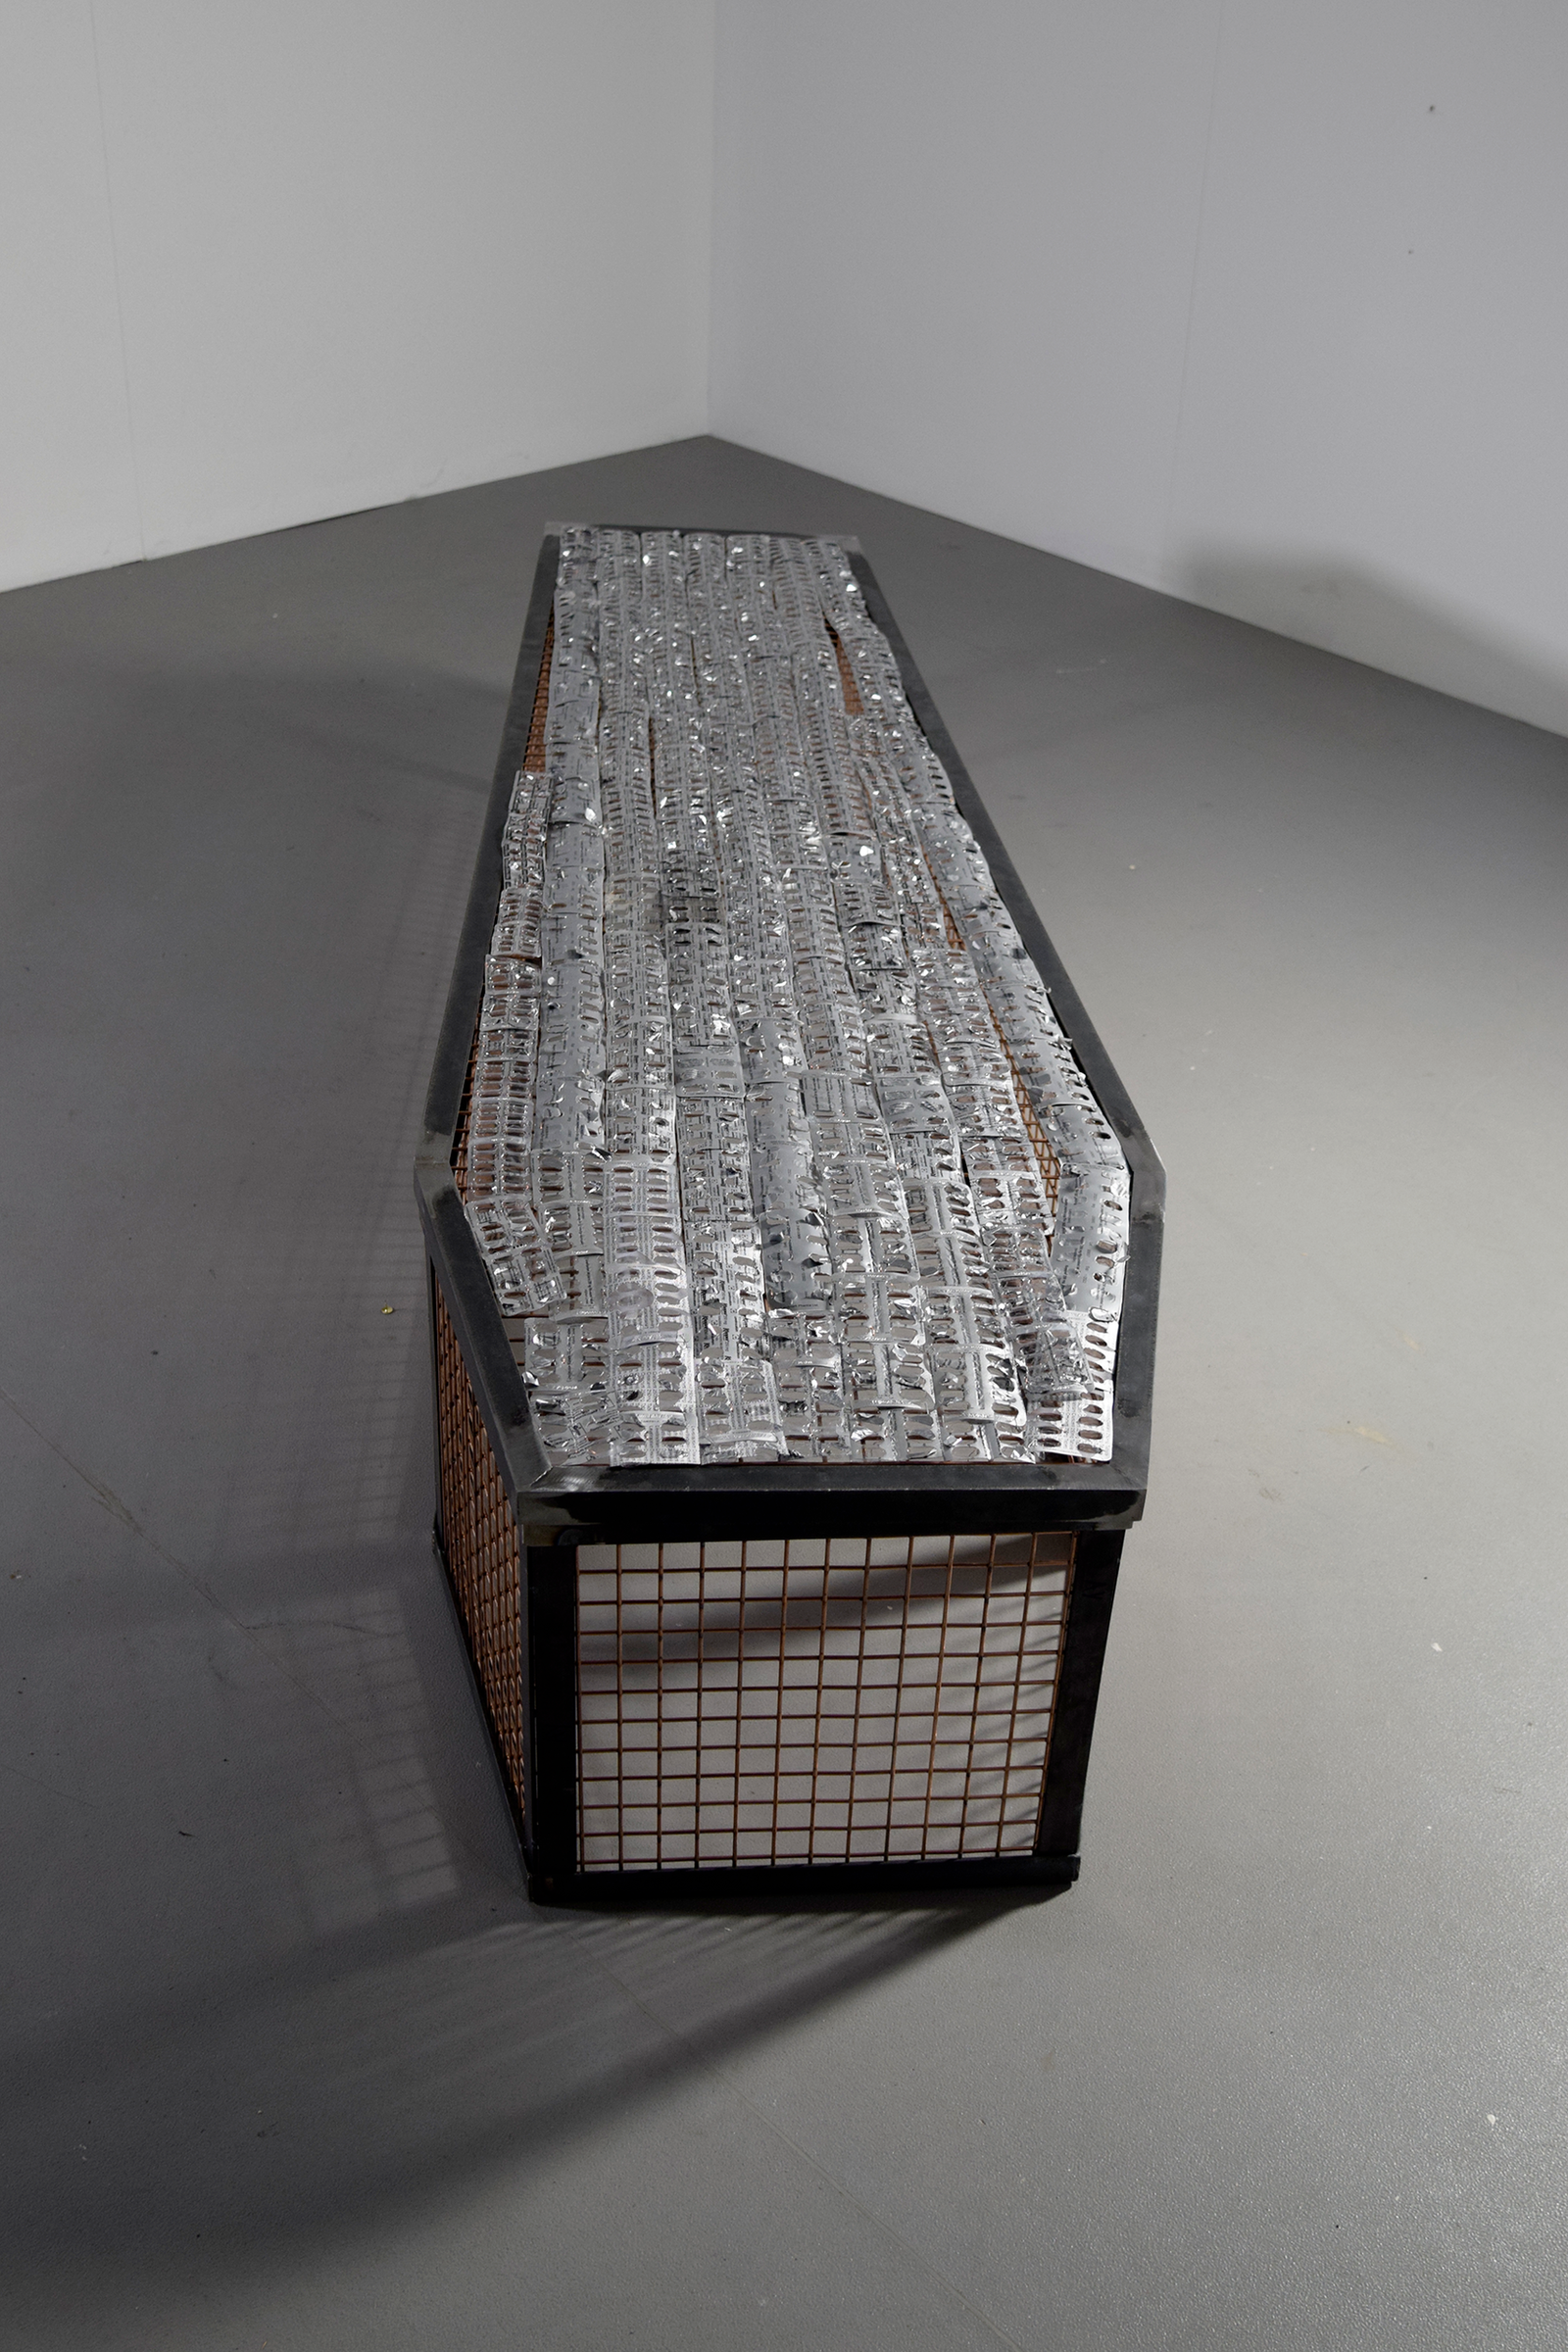 Photo of a life-sized coffin-shaped cage covered in empty used blister packets.